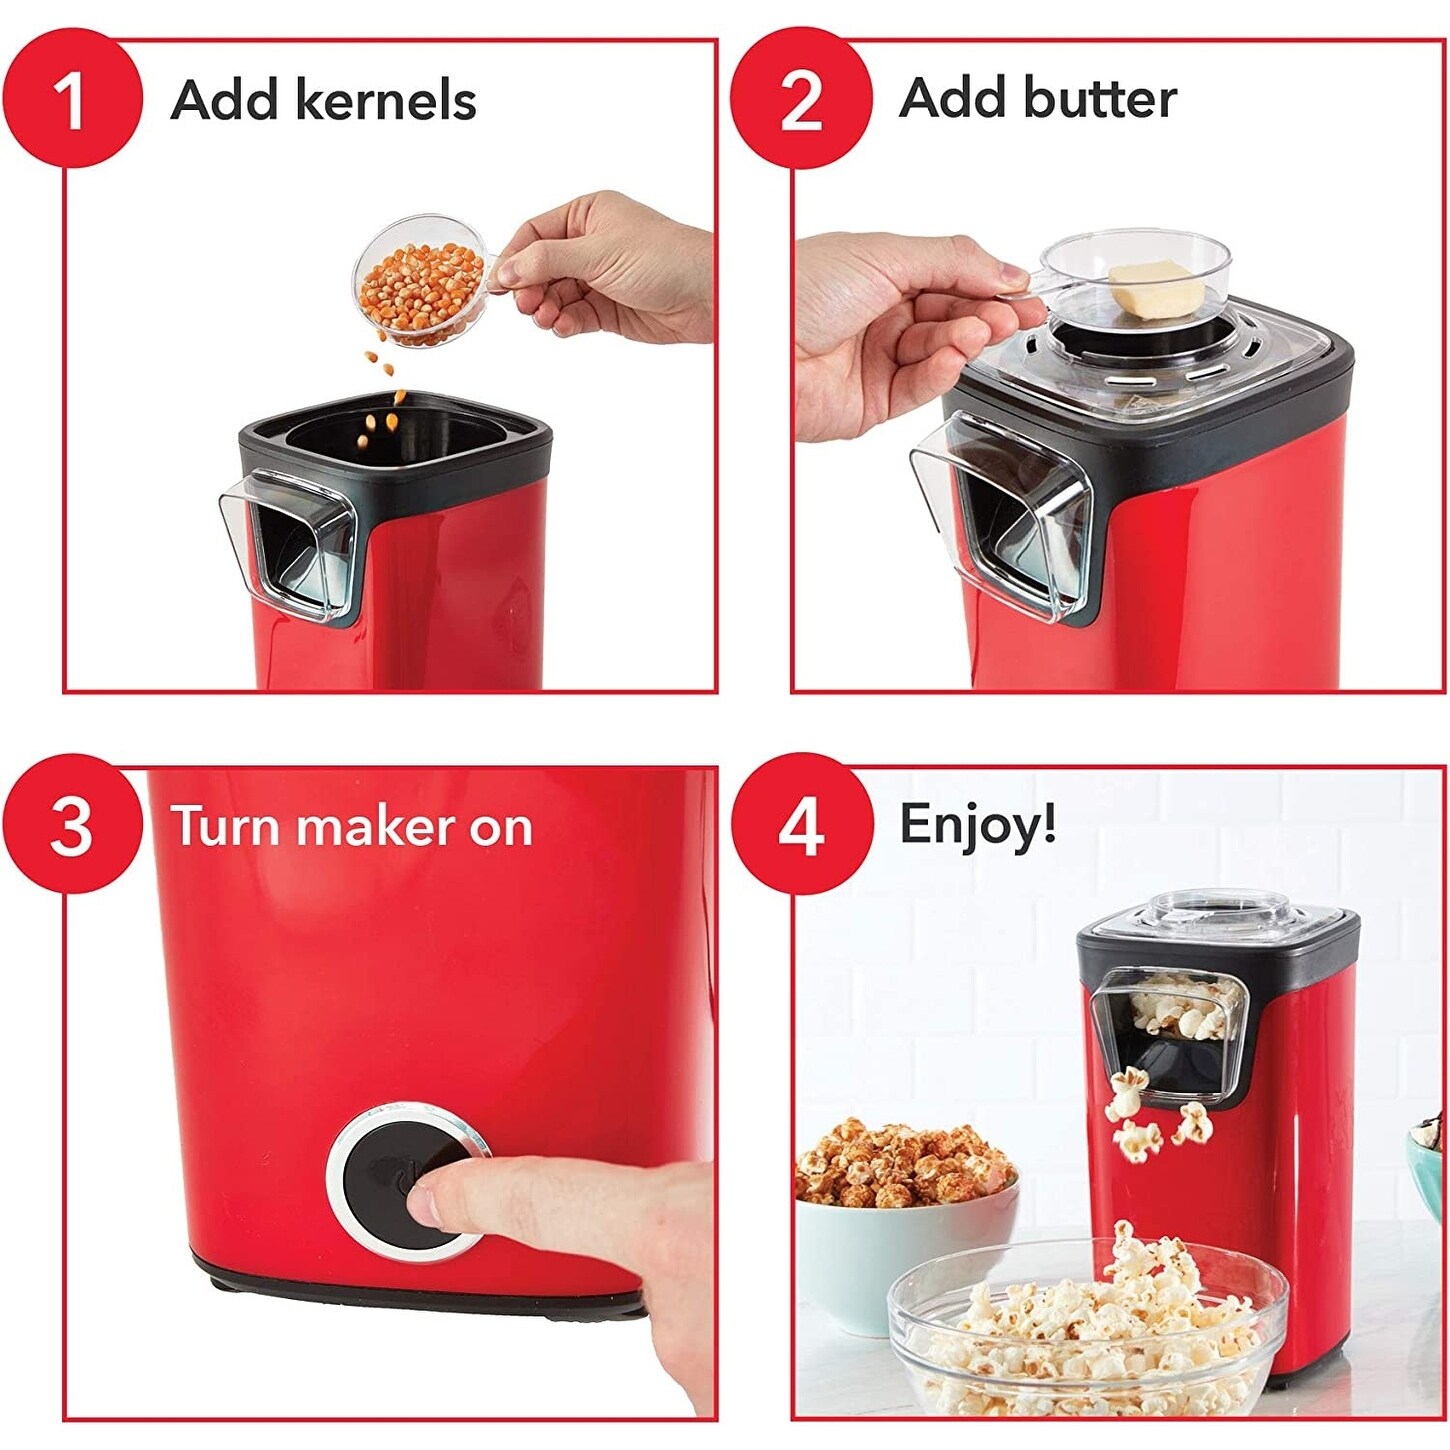 https://ak1.ostkcdn.com/images/products/is/images/direct/0c84600782f2fadef264c6d94332cf9db672df87/DASH-Turbo-POP-Popcorn-Maker---White-%288-cups%29.jpg